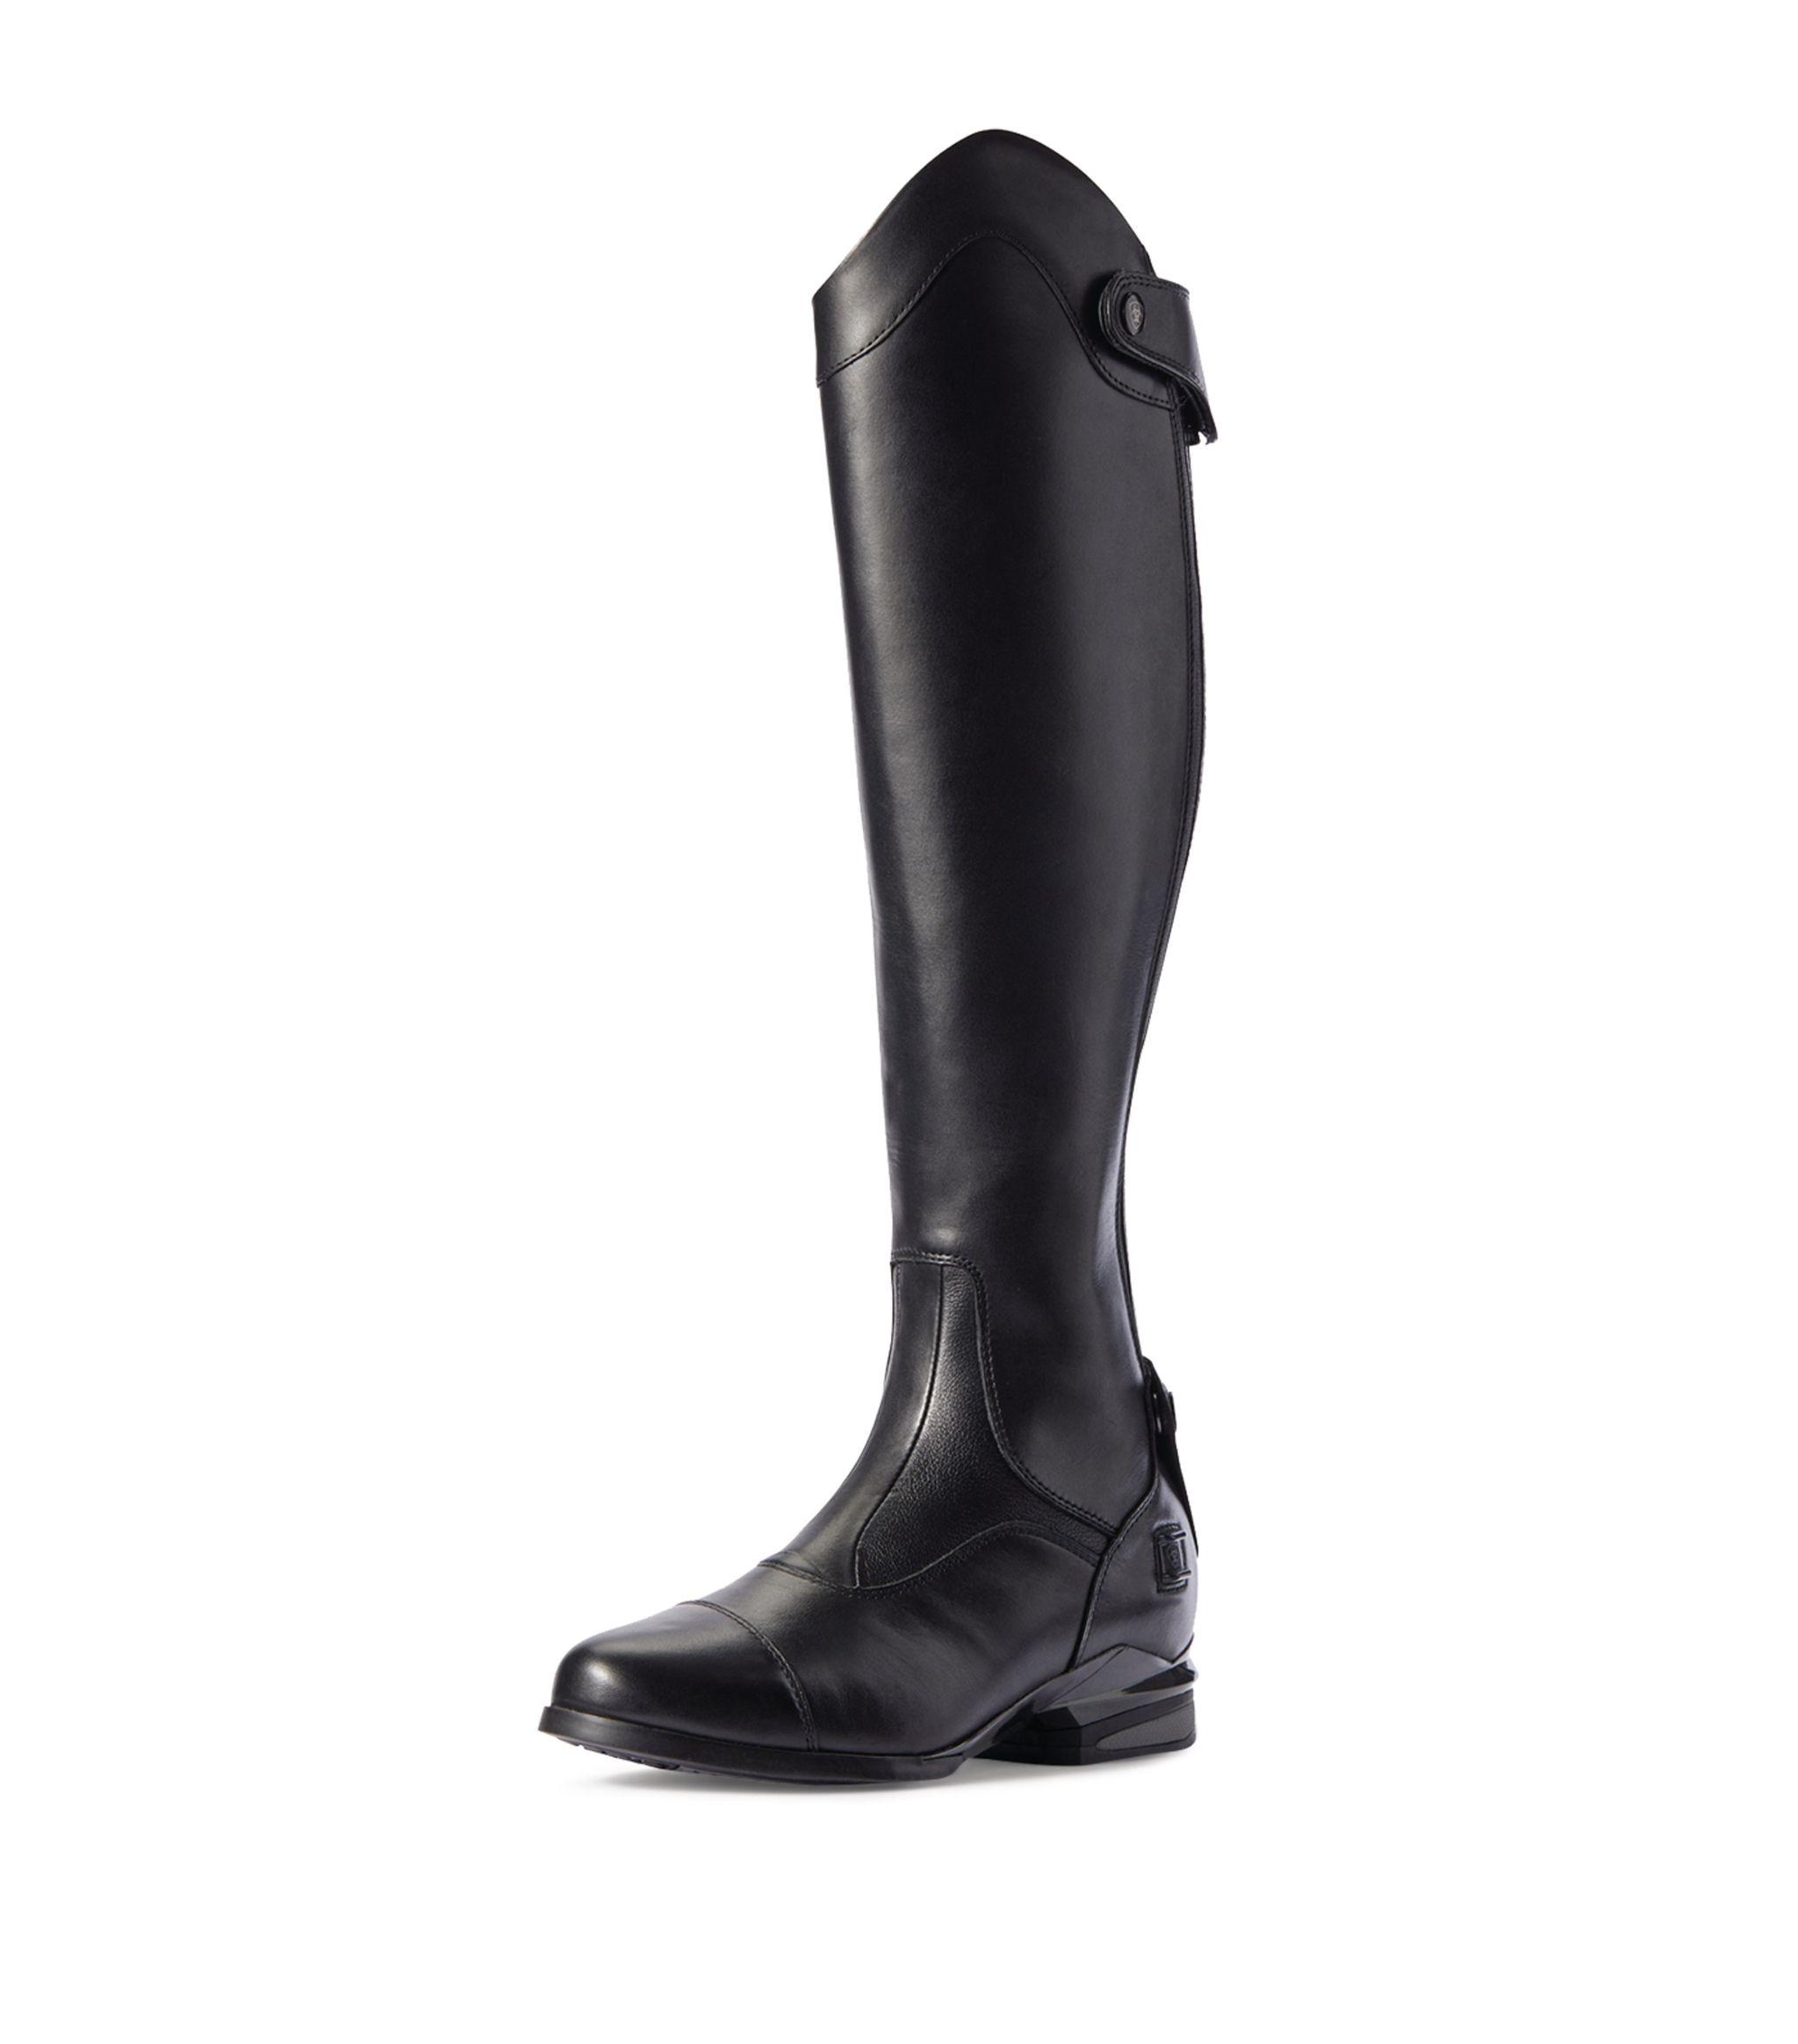 Ariat Leather Nitro Max Tall Riding Boots in Black - Lyst